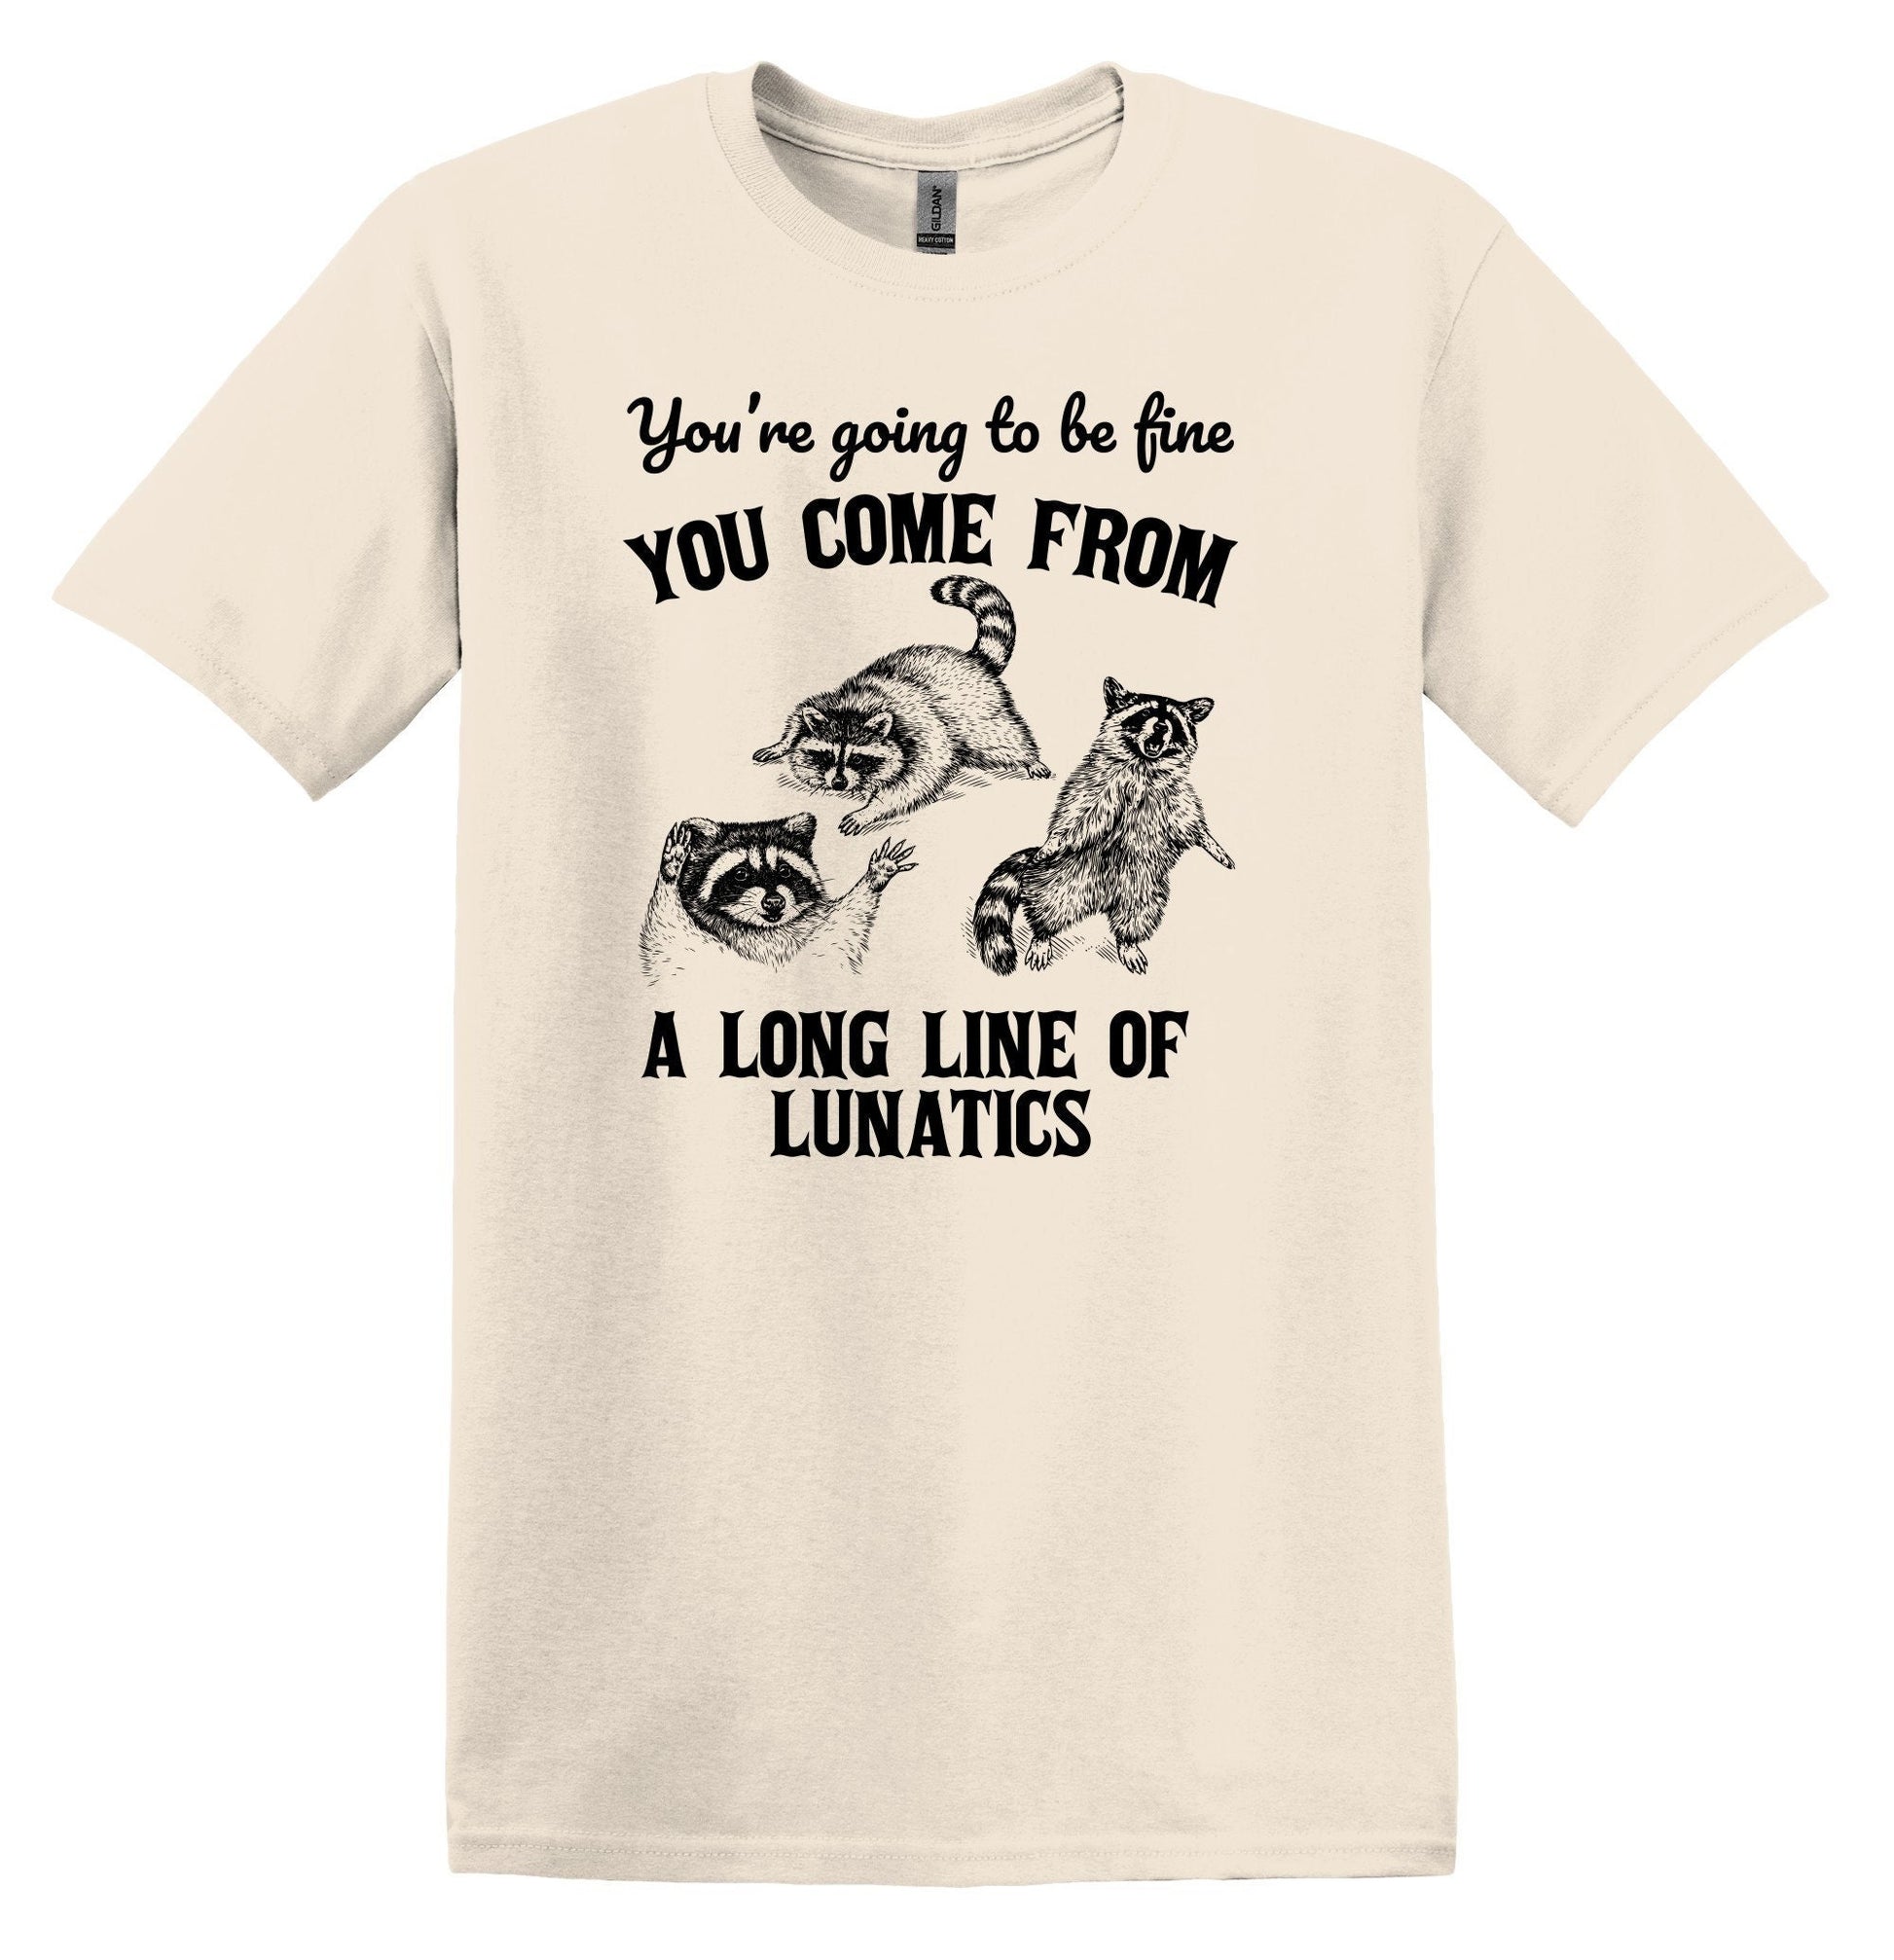 You're Going to be Fine You Come From a Long Line of Lunatics Shirt Funny Shirts Vintage Funny T-Shirts Raccoon Shirt Minimalist Shirt